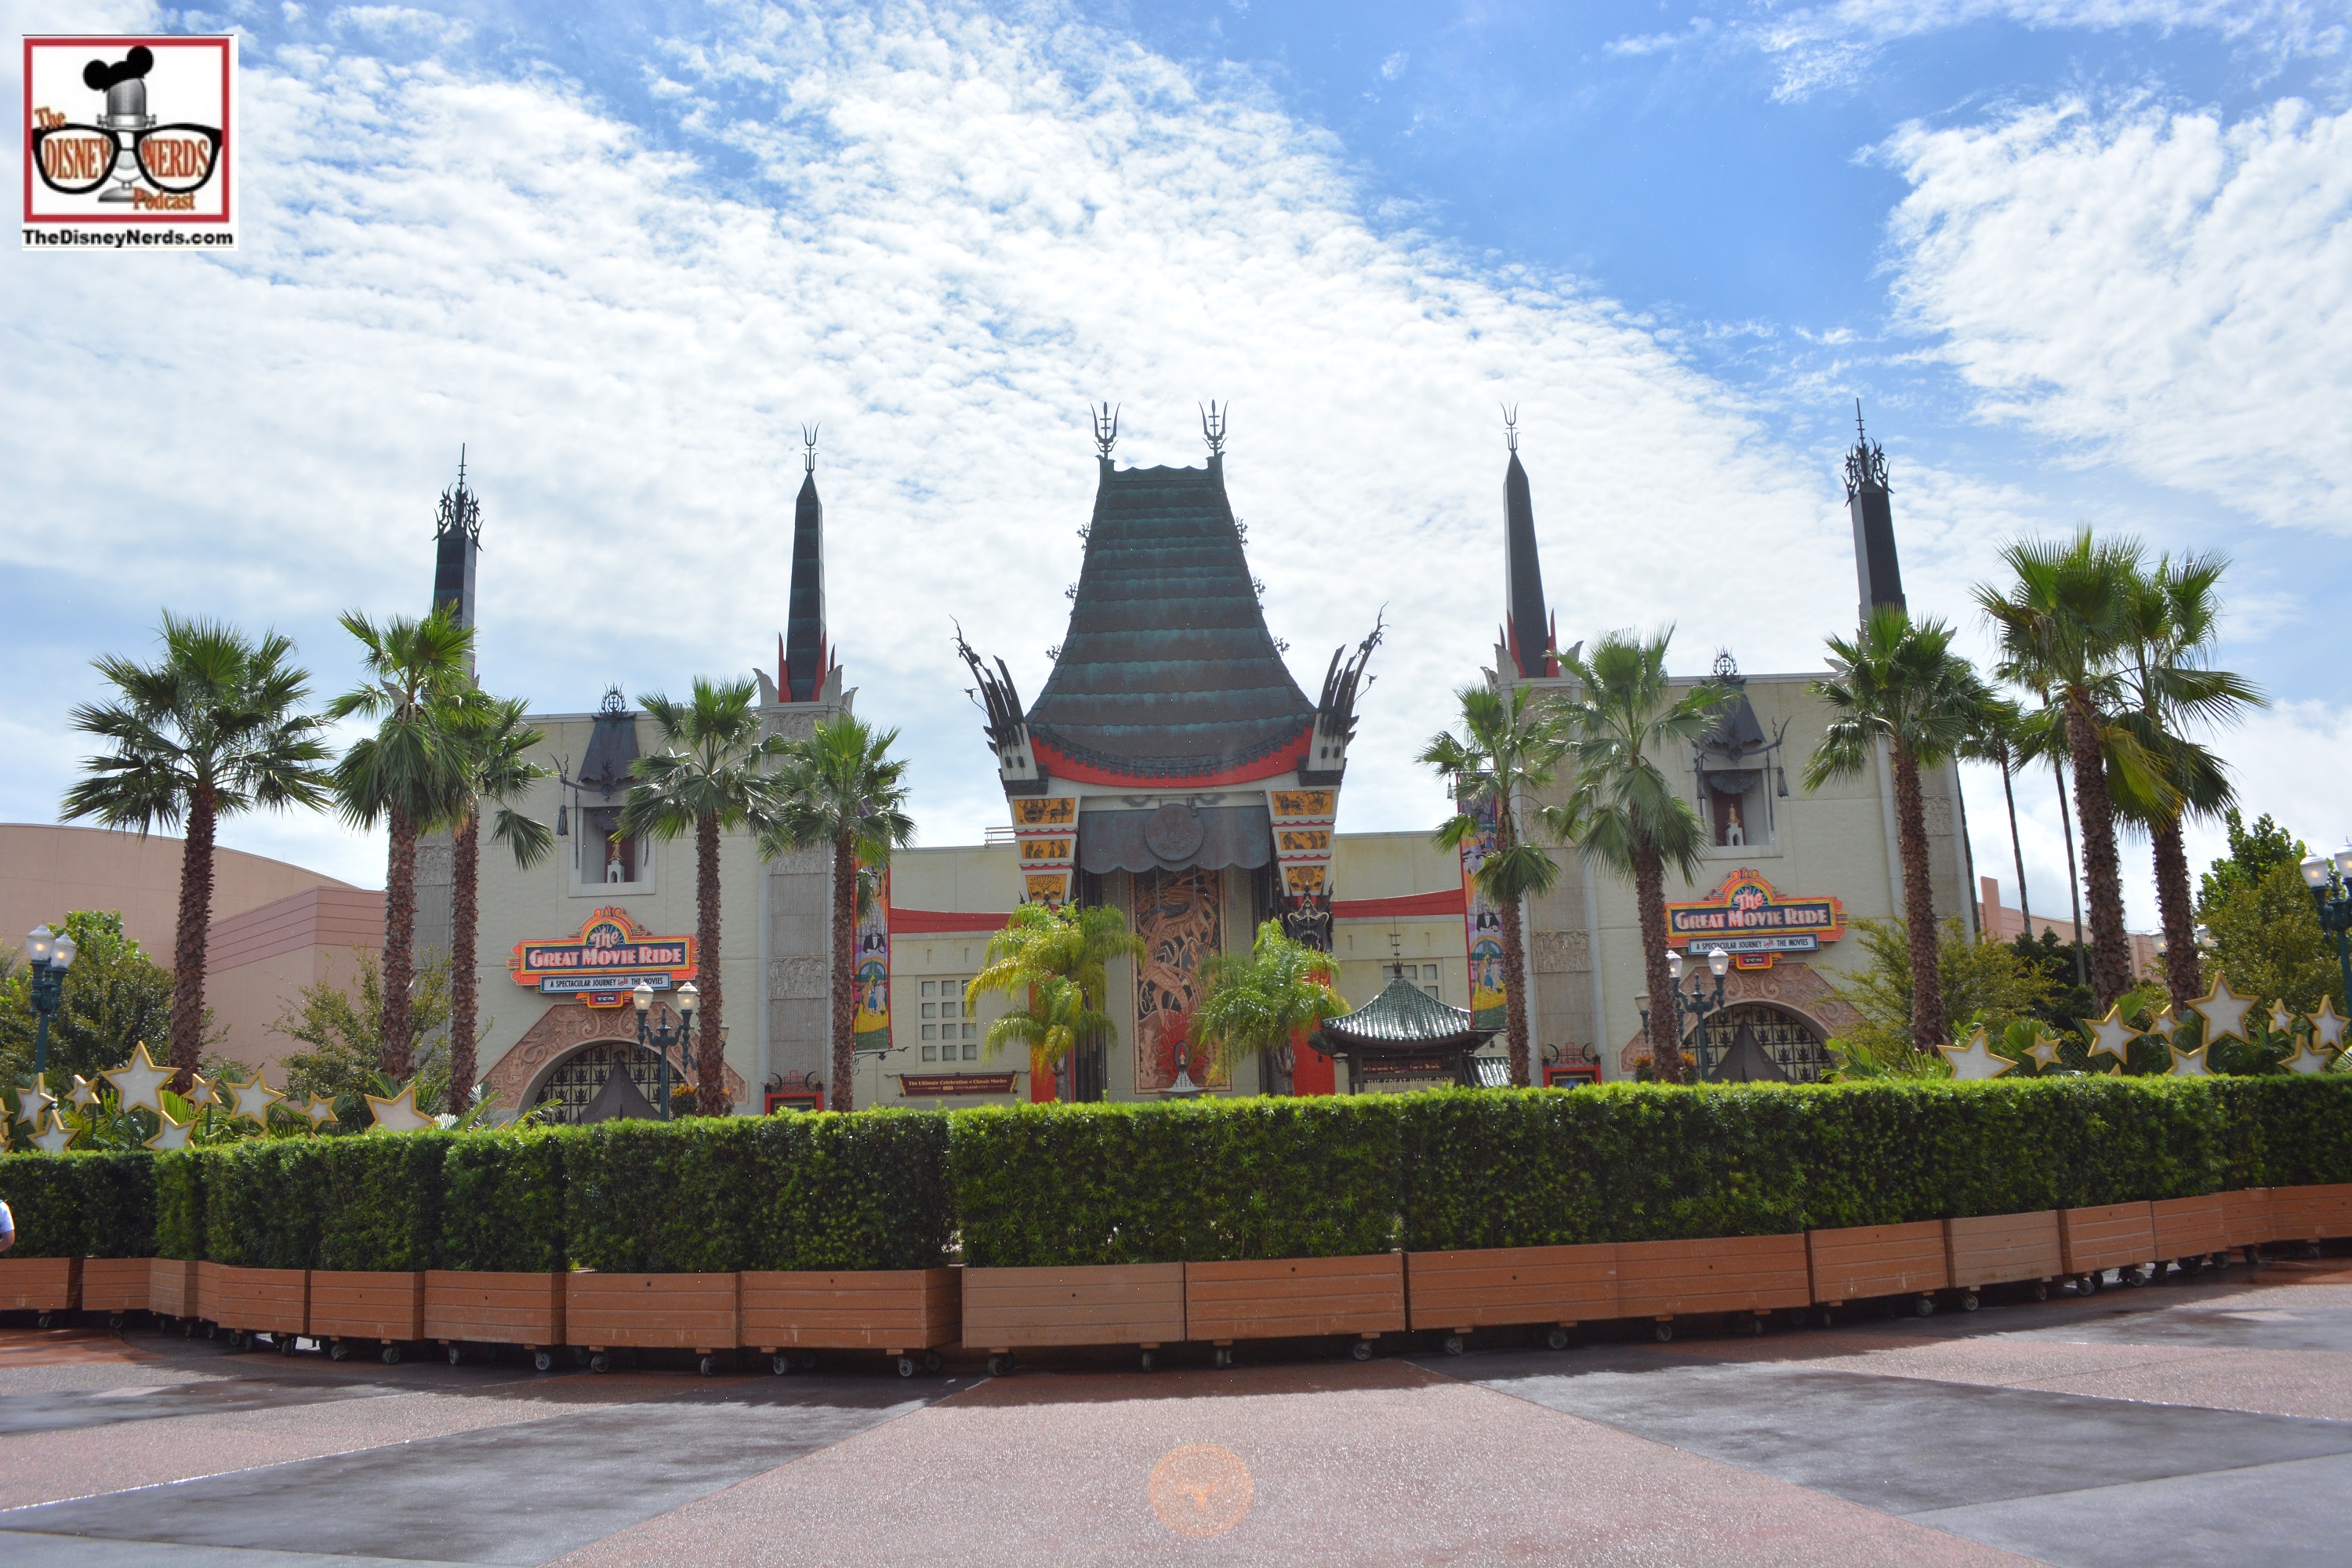 The Chinese Theater, no stage, lots of bushes..